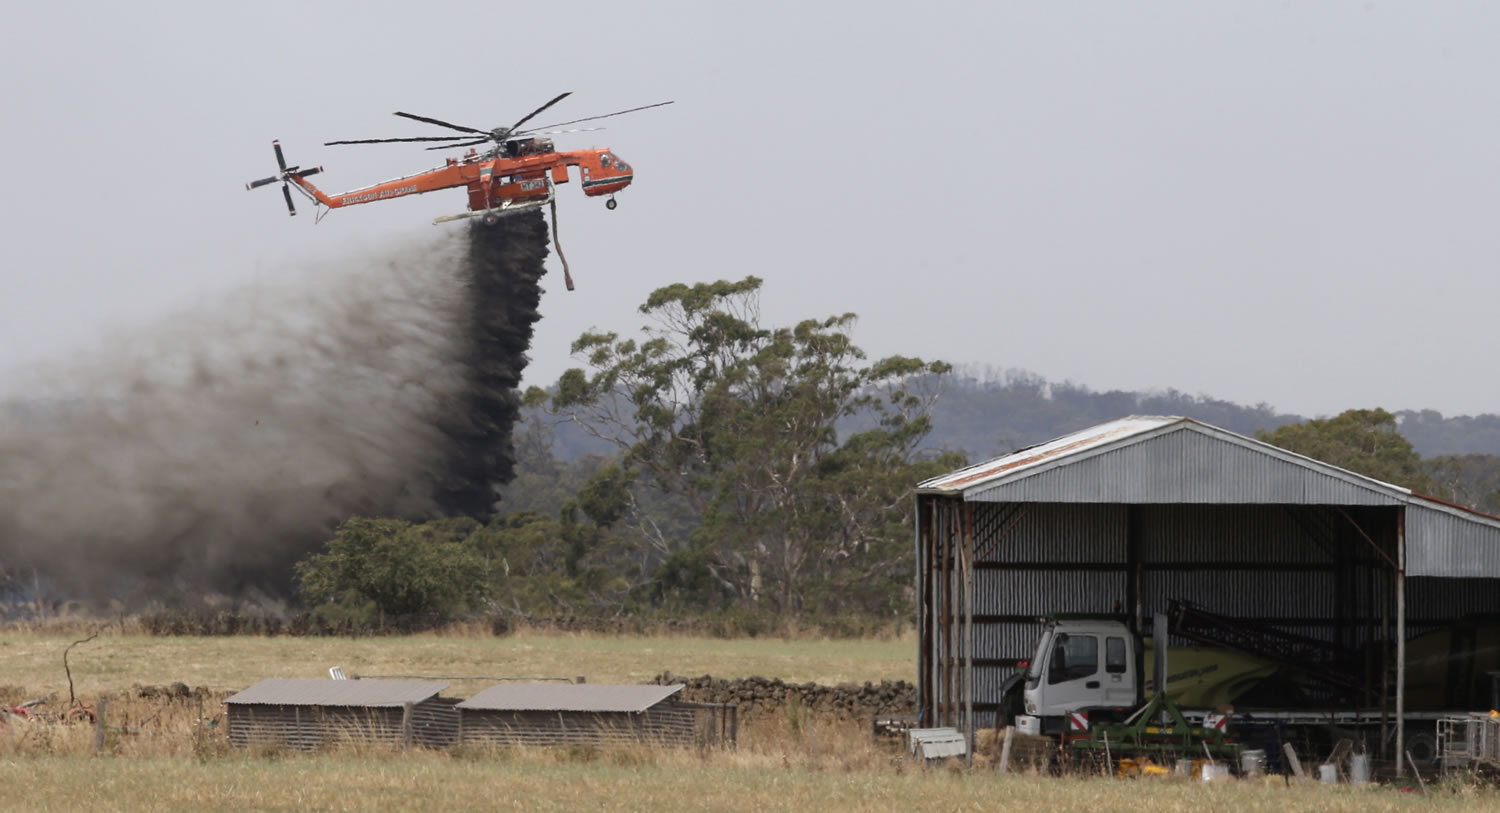 A Skycrane helicopter drops a load of water as it works to hold back a wildfire from the hamlet of Claredon in Victoria, Australia. More than 100 homes have been destroyed by the Christmas Day wildfire that tore through a stretch of coastline popular with tourists in southern Australia.